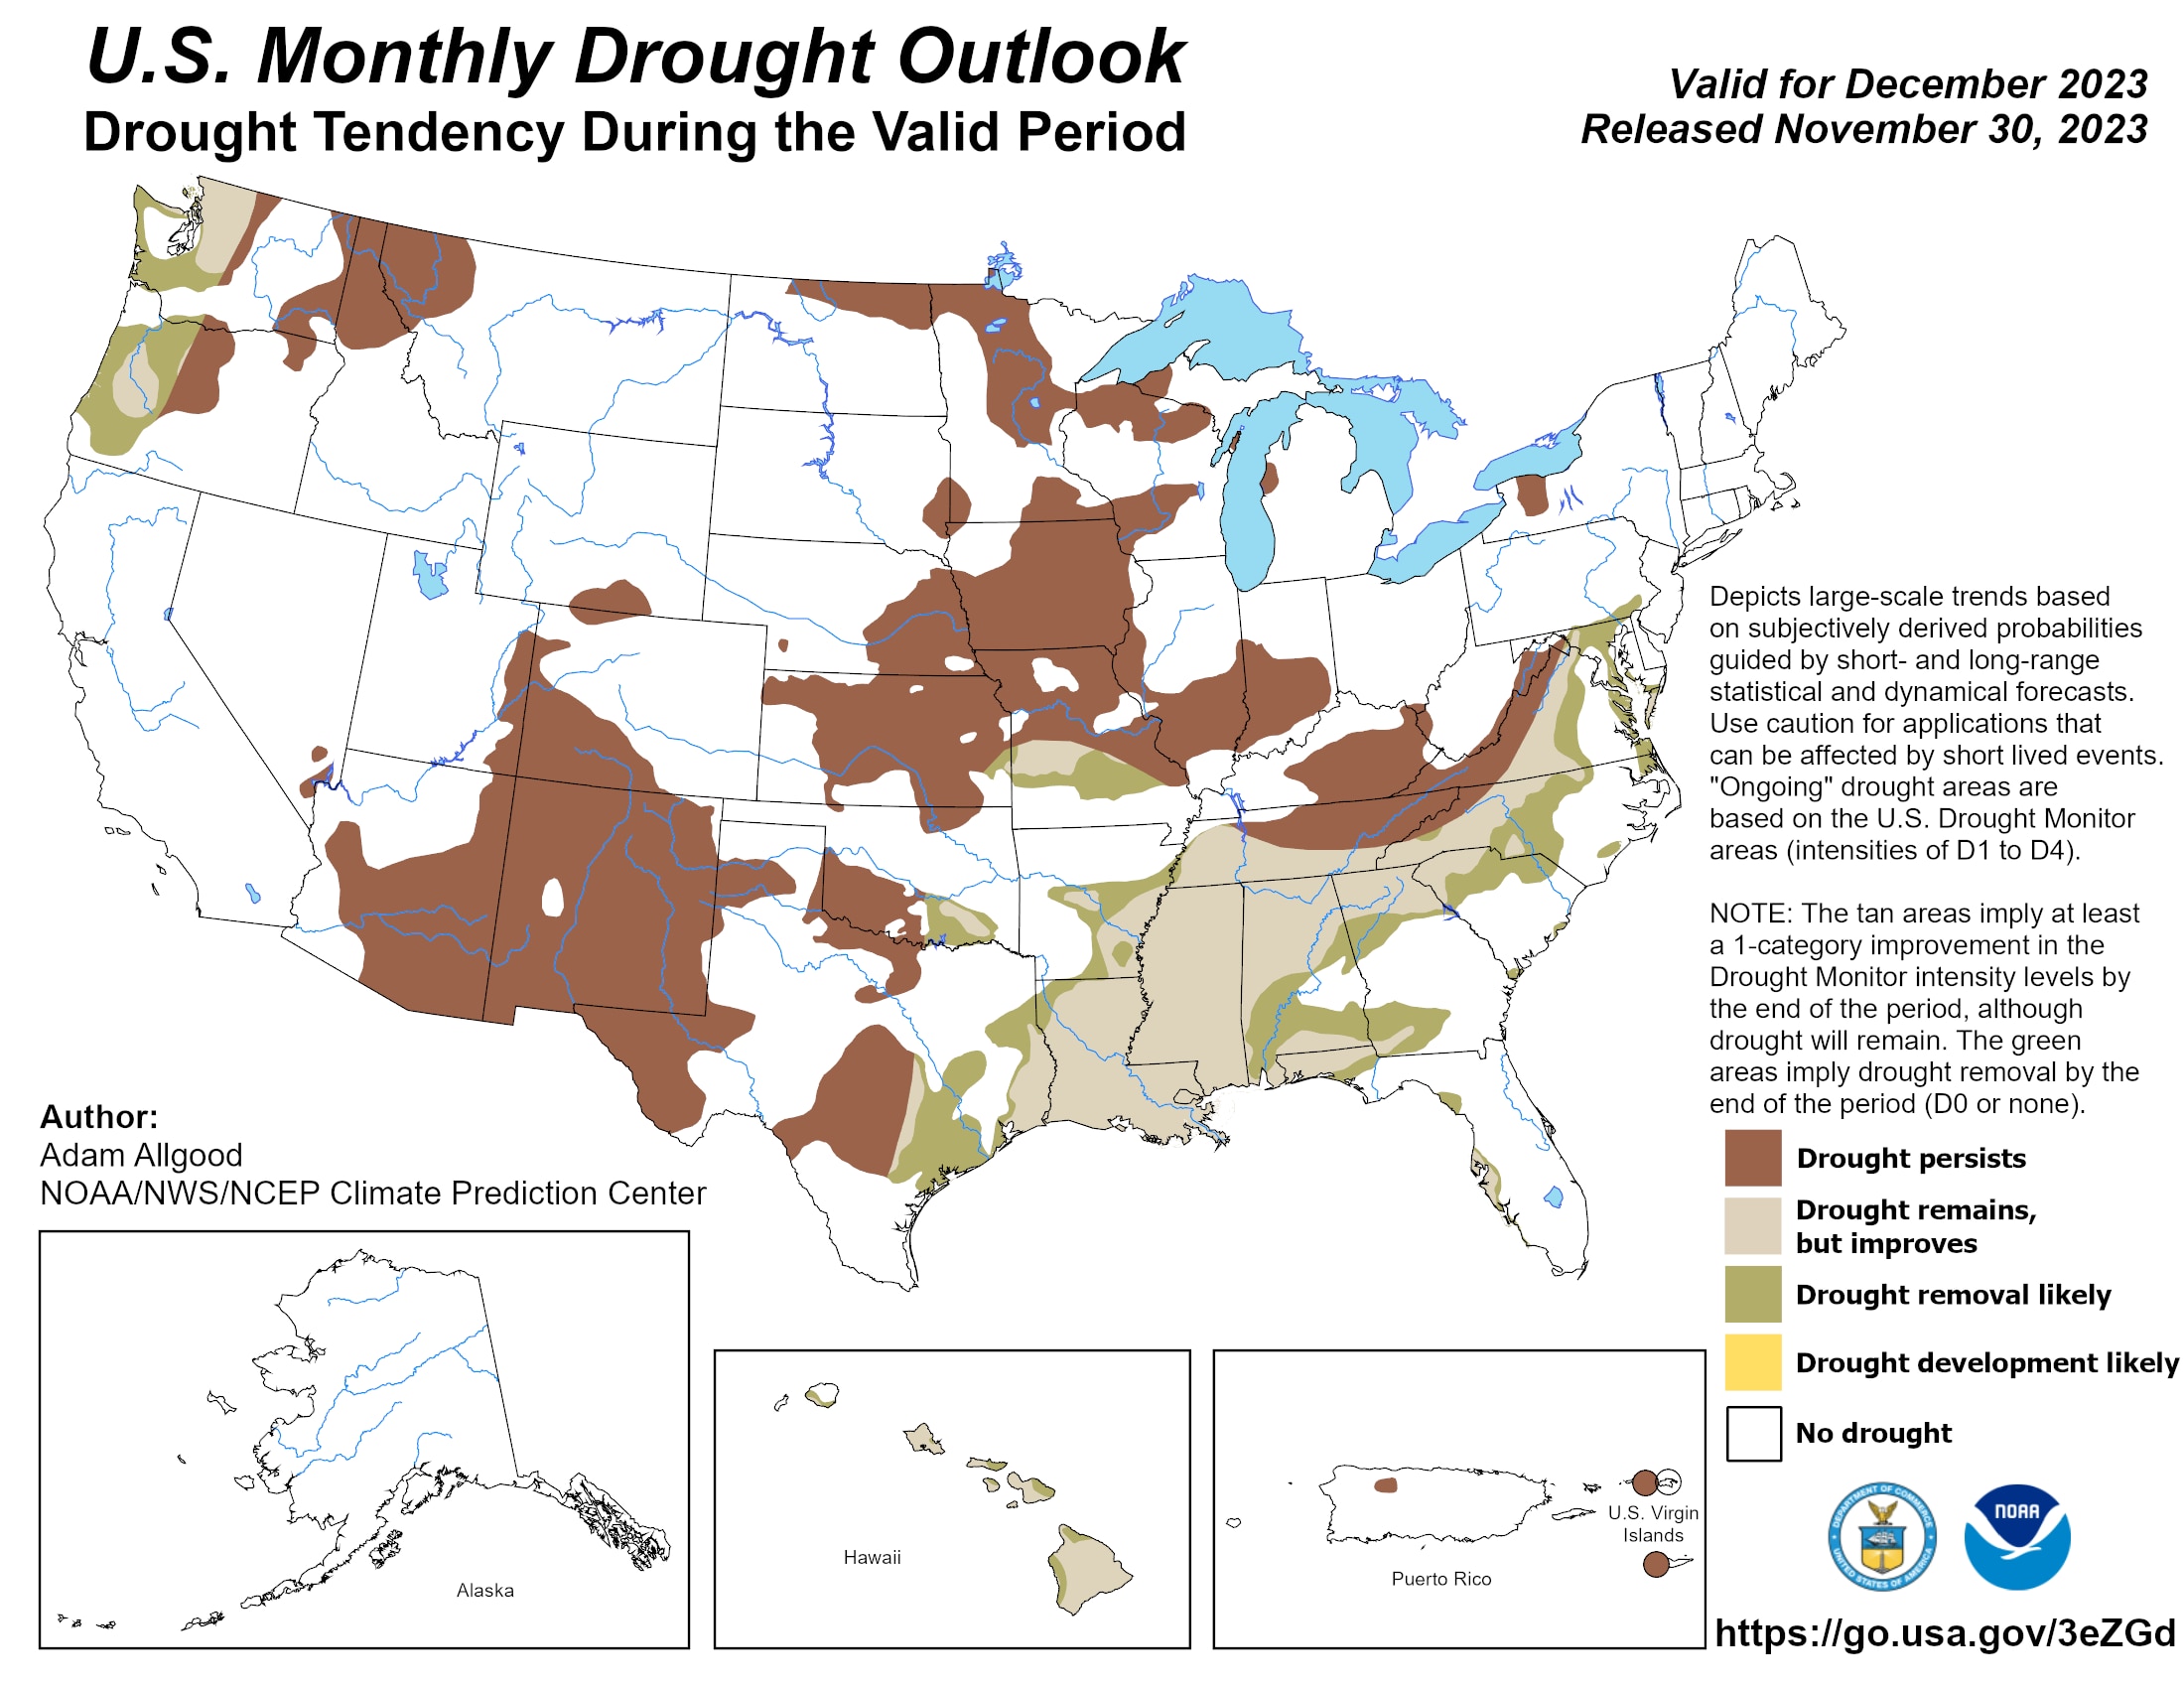 The National Weather Service Climate Prediction Center's Monthly Drought Outlook is issued at the end of each calendar month and is valid for the upcoming month. The outlook predicts whether drought will persist, develop, improve, or be removed over the next 30 days or so.